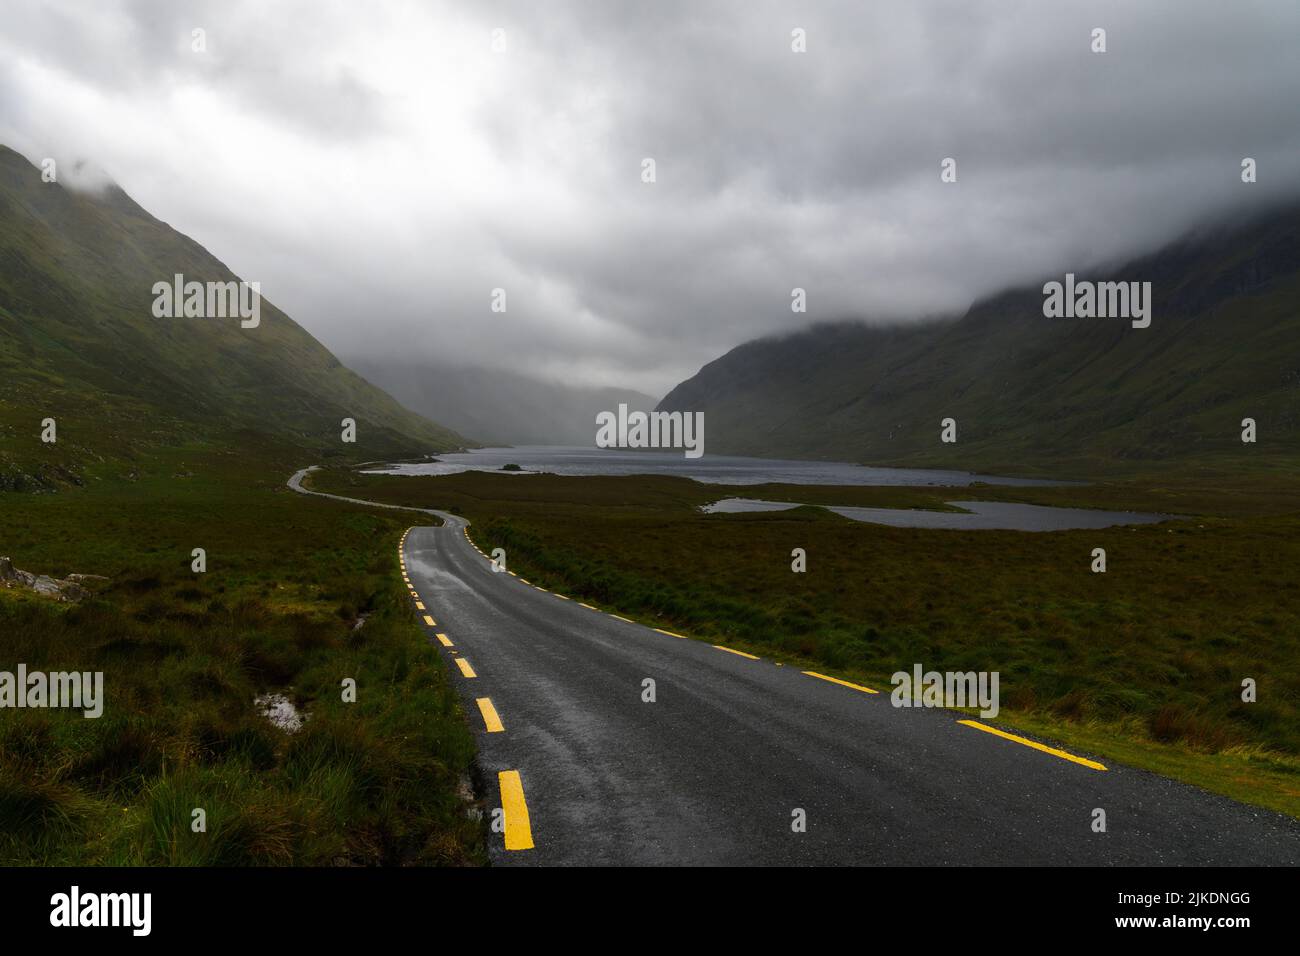 narrow black-top highway with yellow road markings leads through an overcast mountain valley with fog and mist and lakes o nthe valley bottom Stock Photo